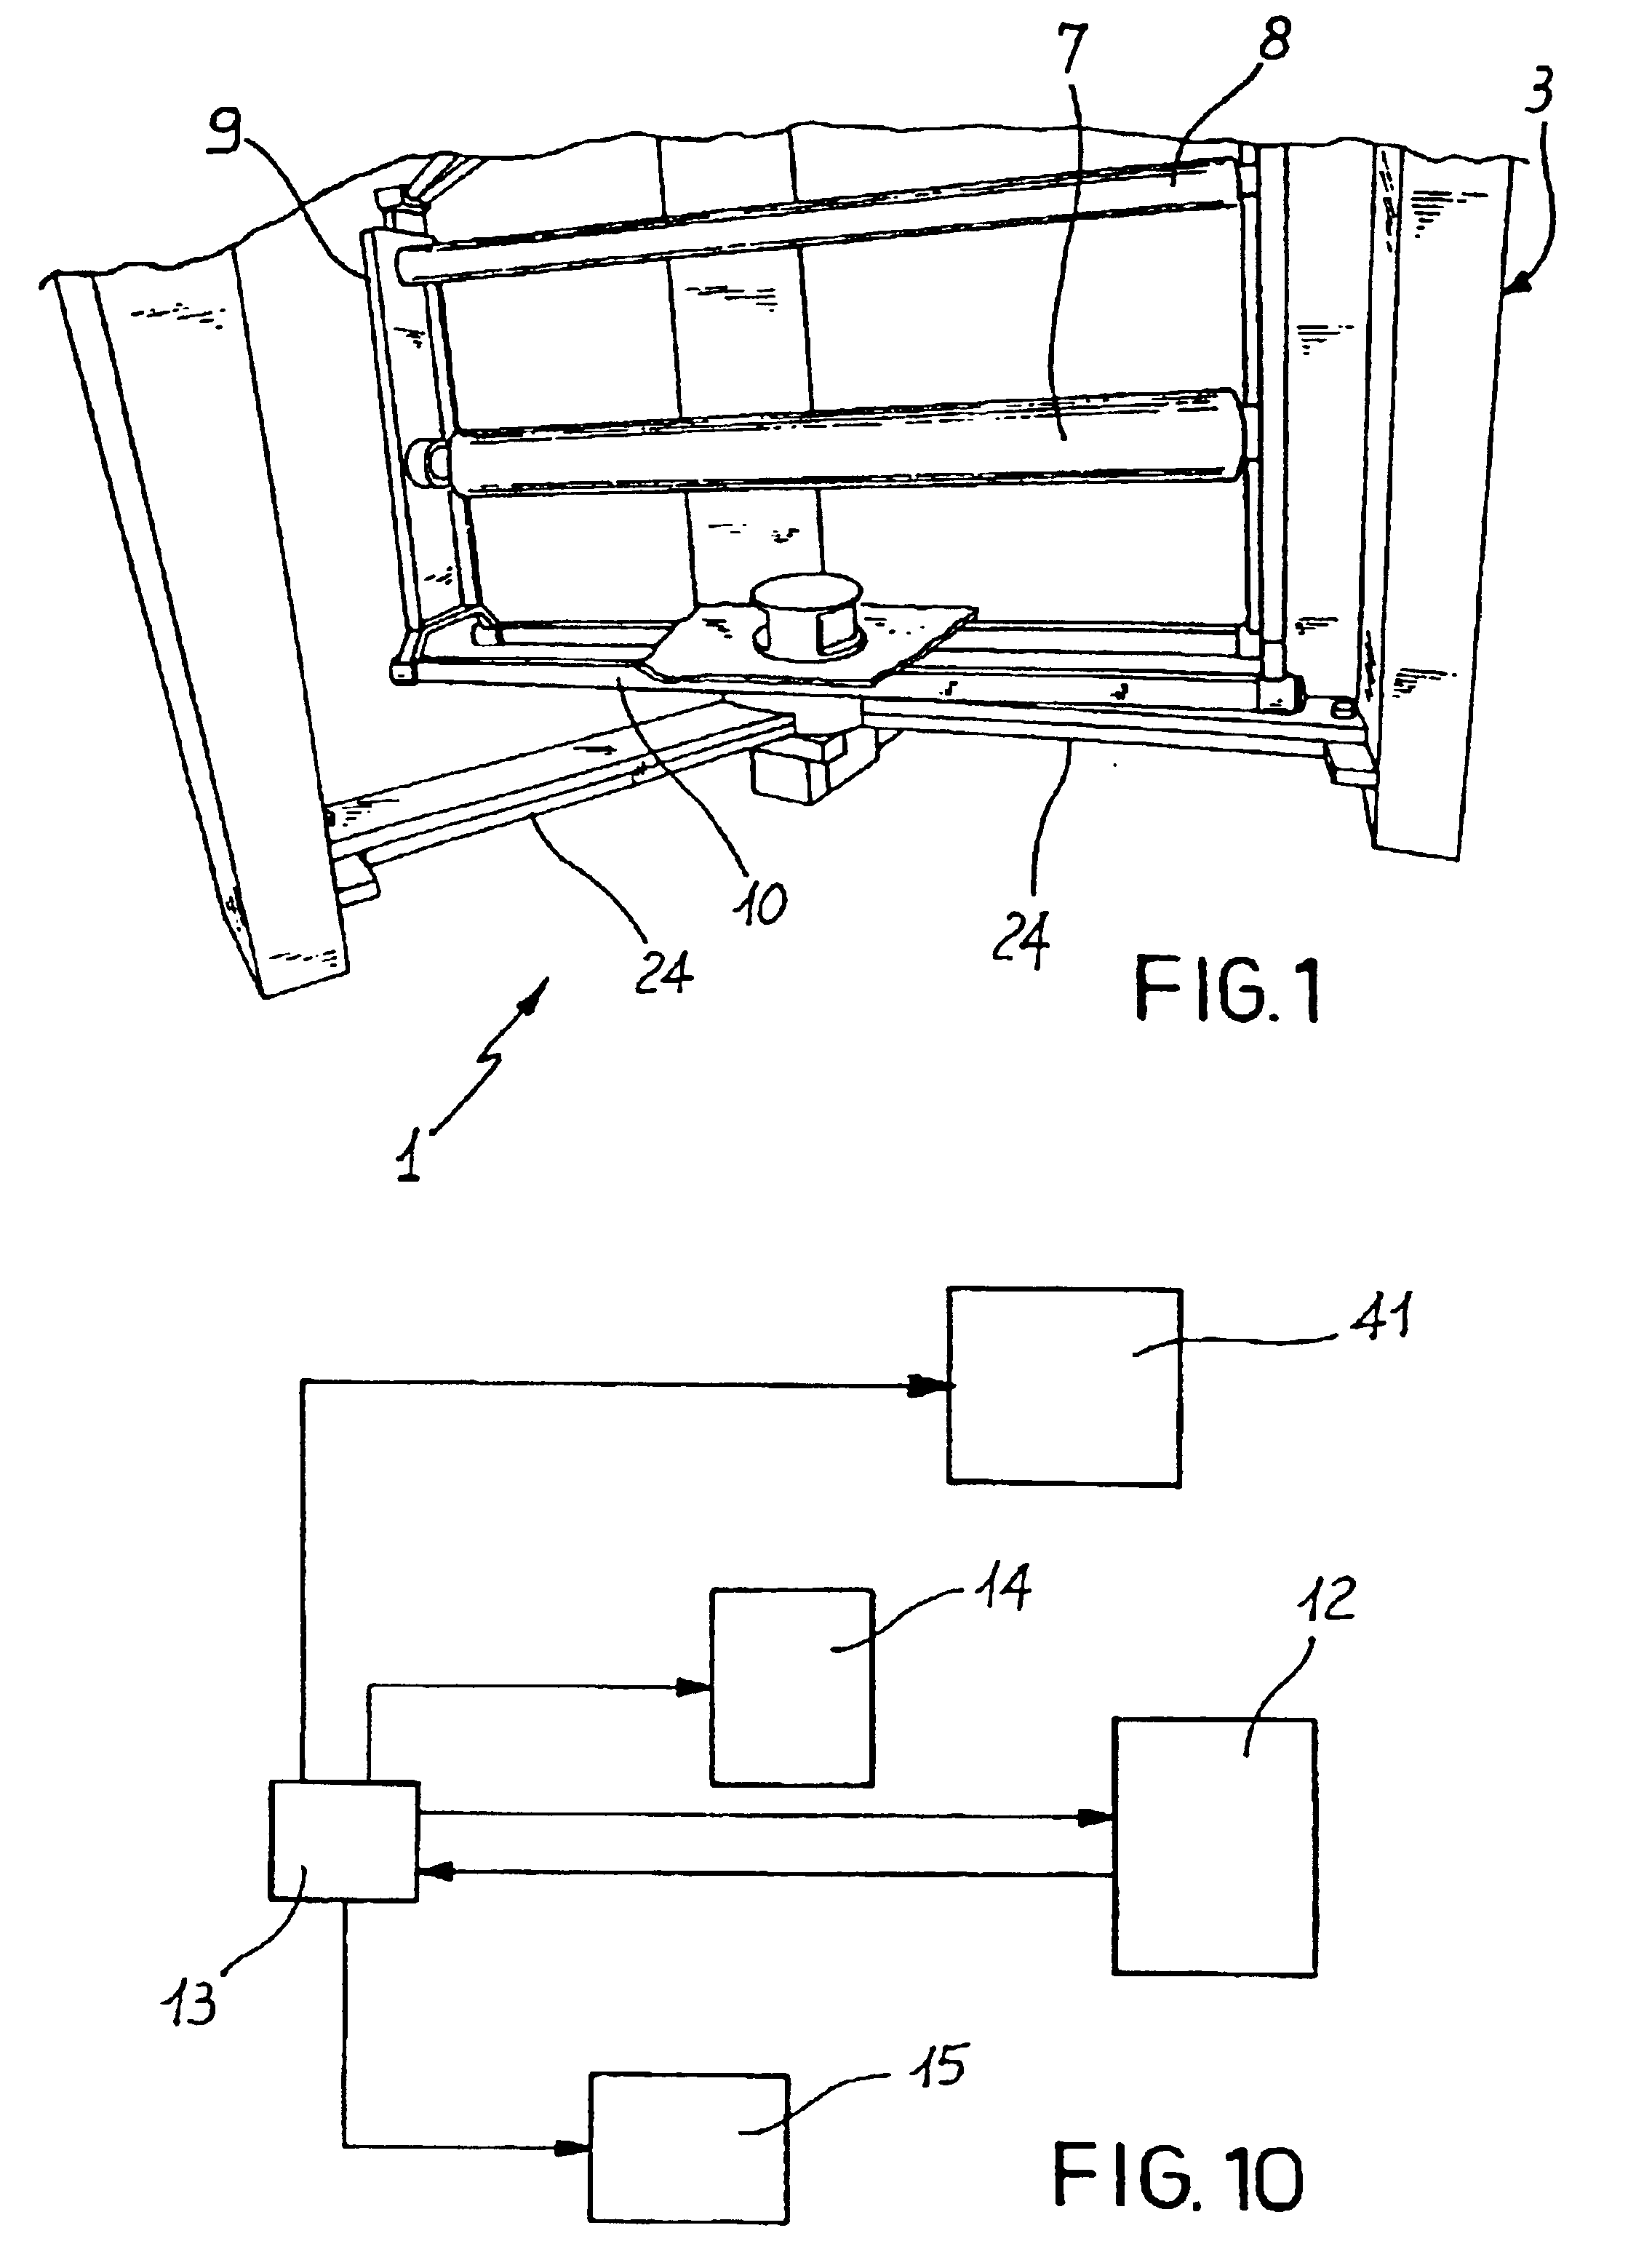 Apparatus and method for controlling the weight of fabric produced by a textile machine, in particular by a circular knitting machine